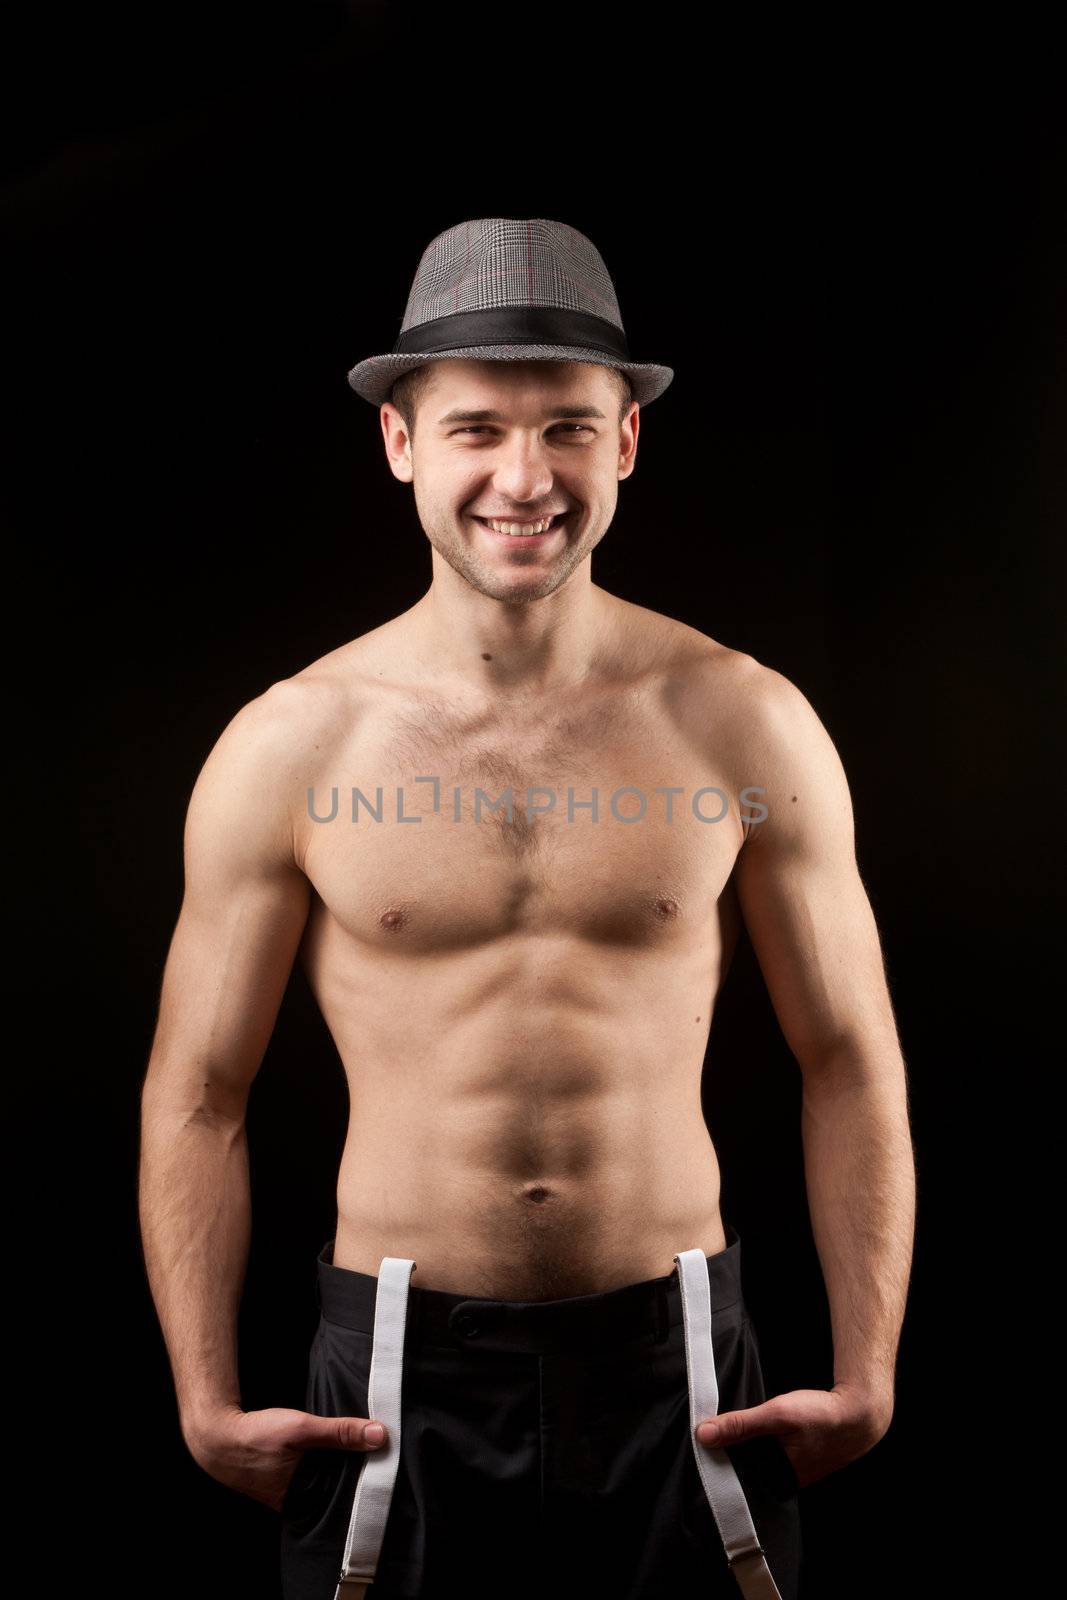 men in the hat on with suspenders over black